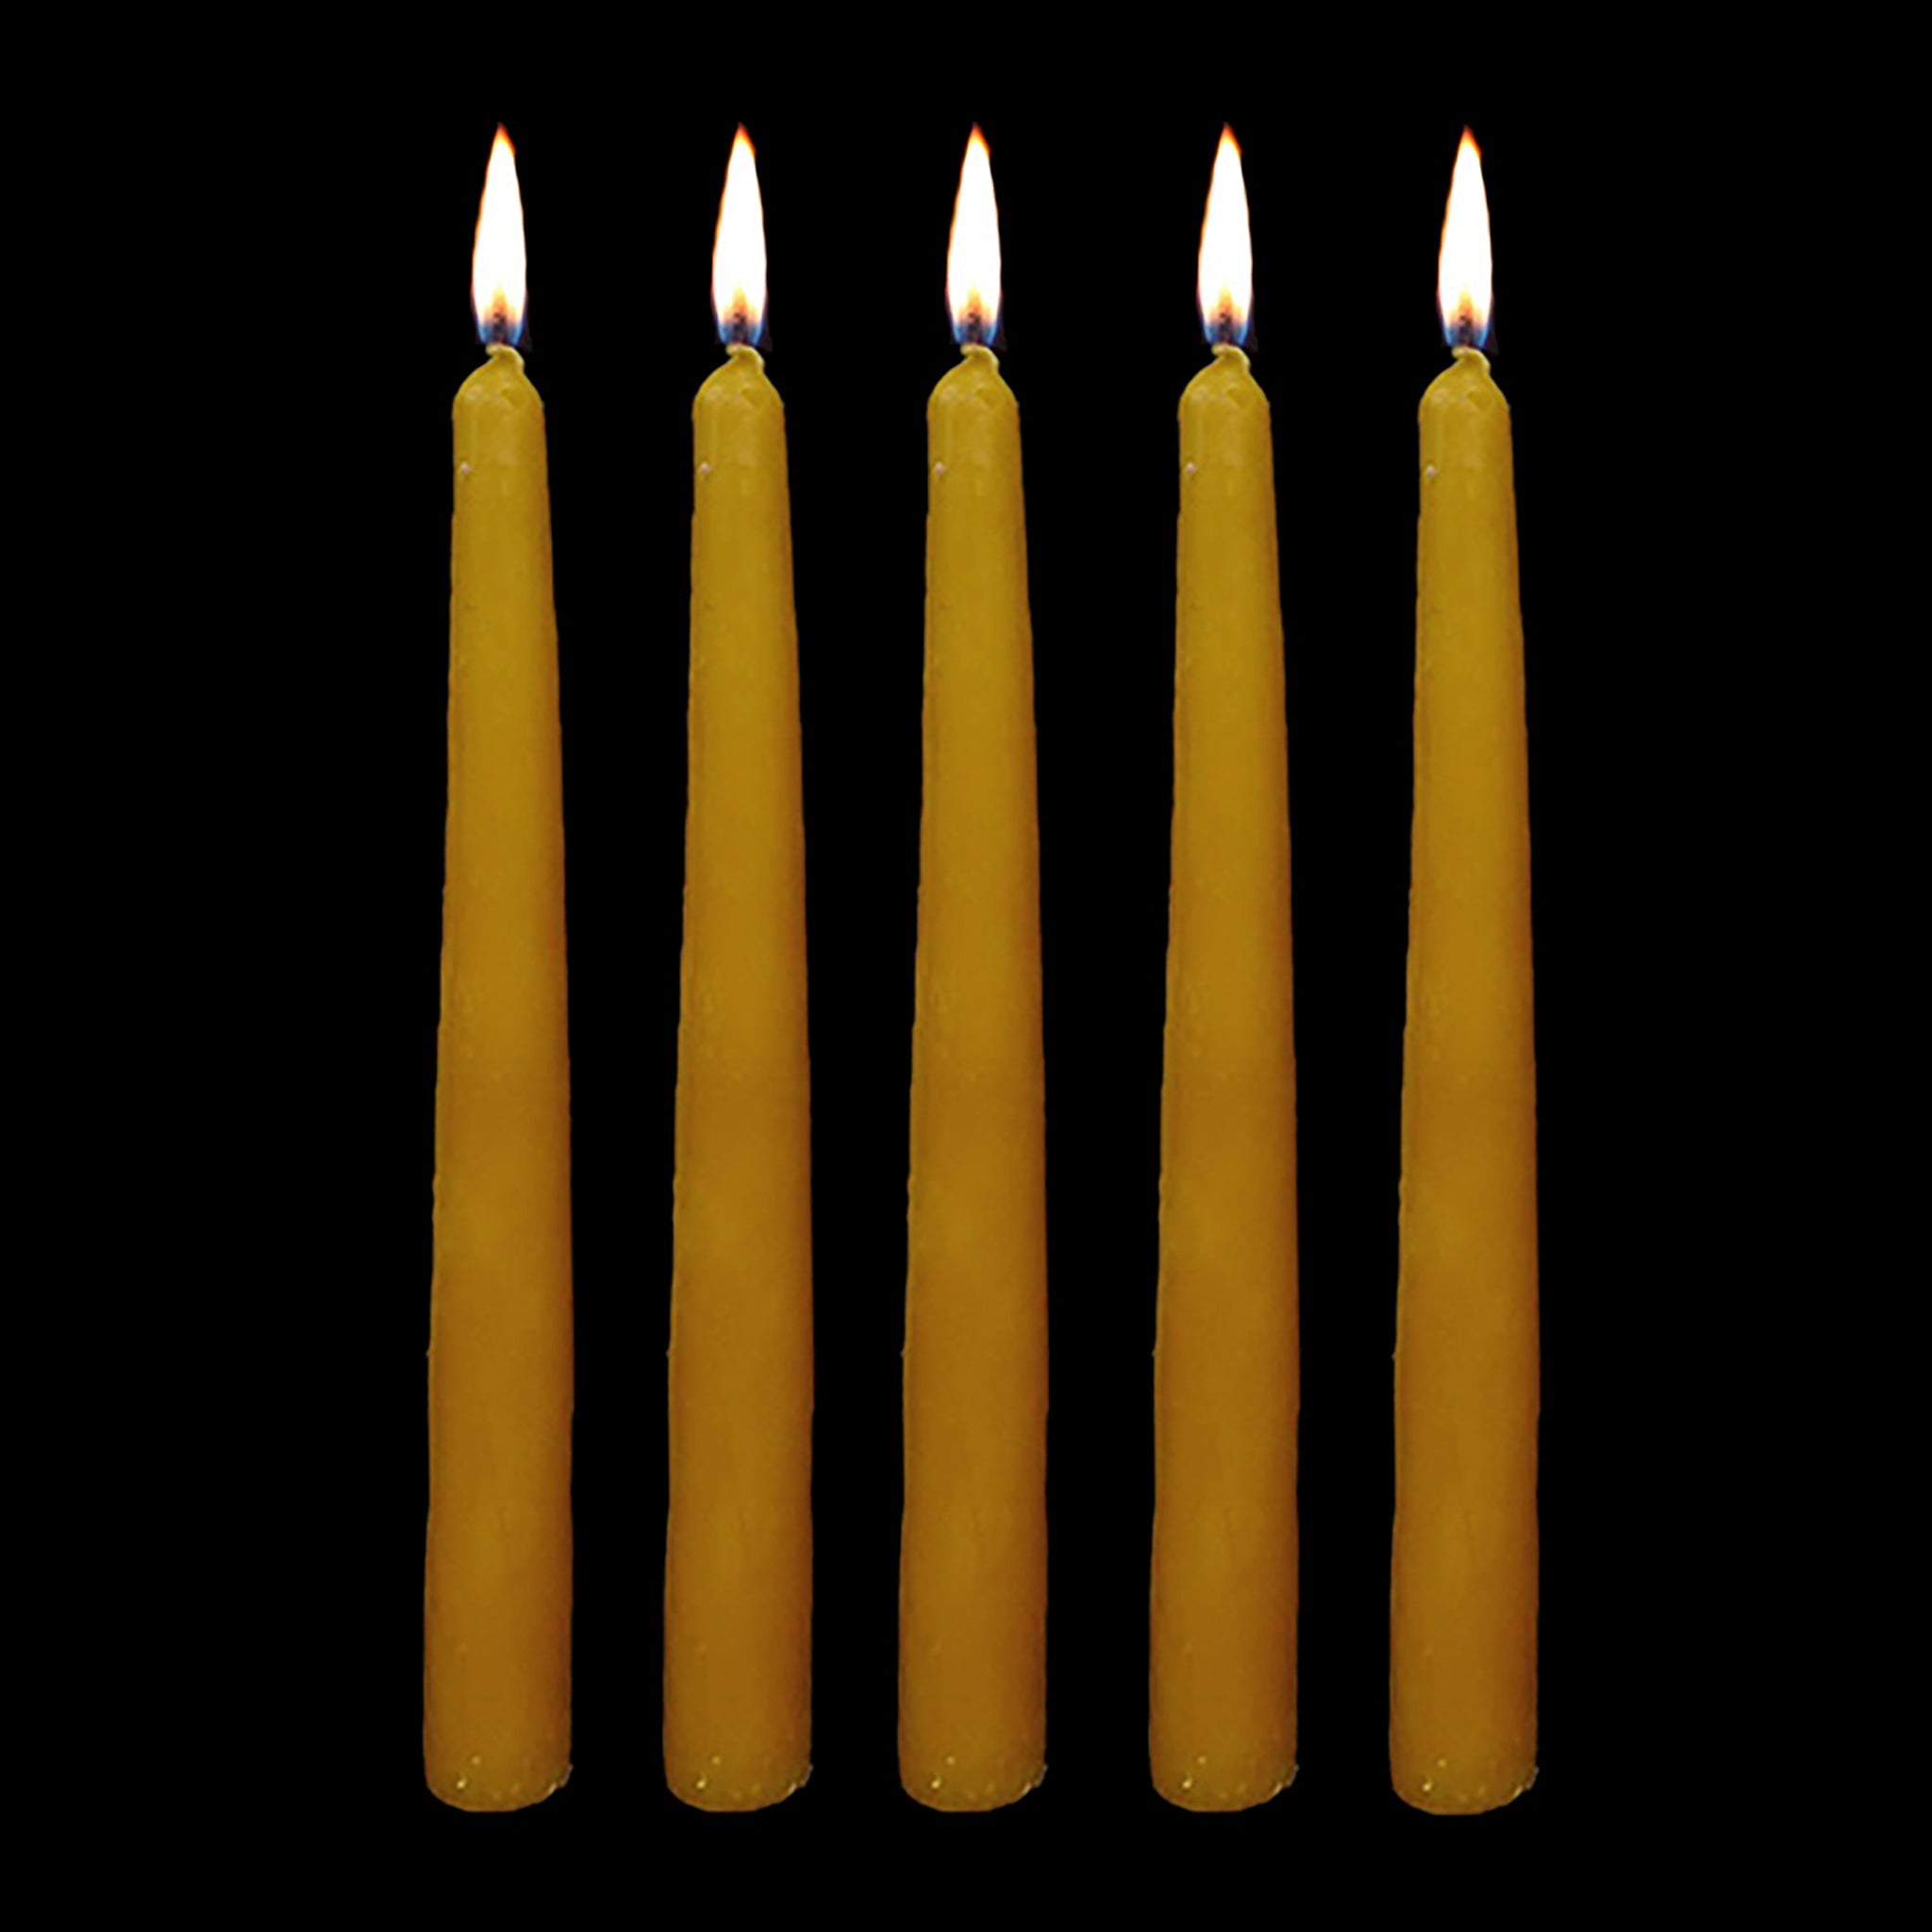 Large 100% Beeswax Candles x 5 - Lit